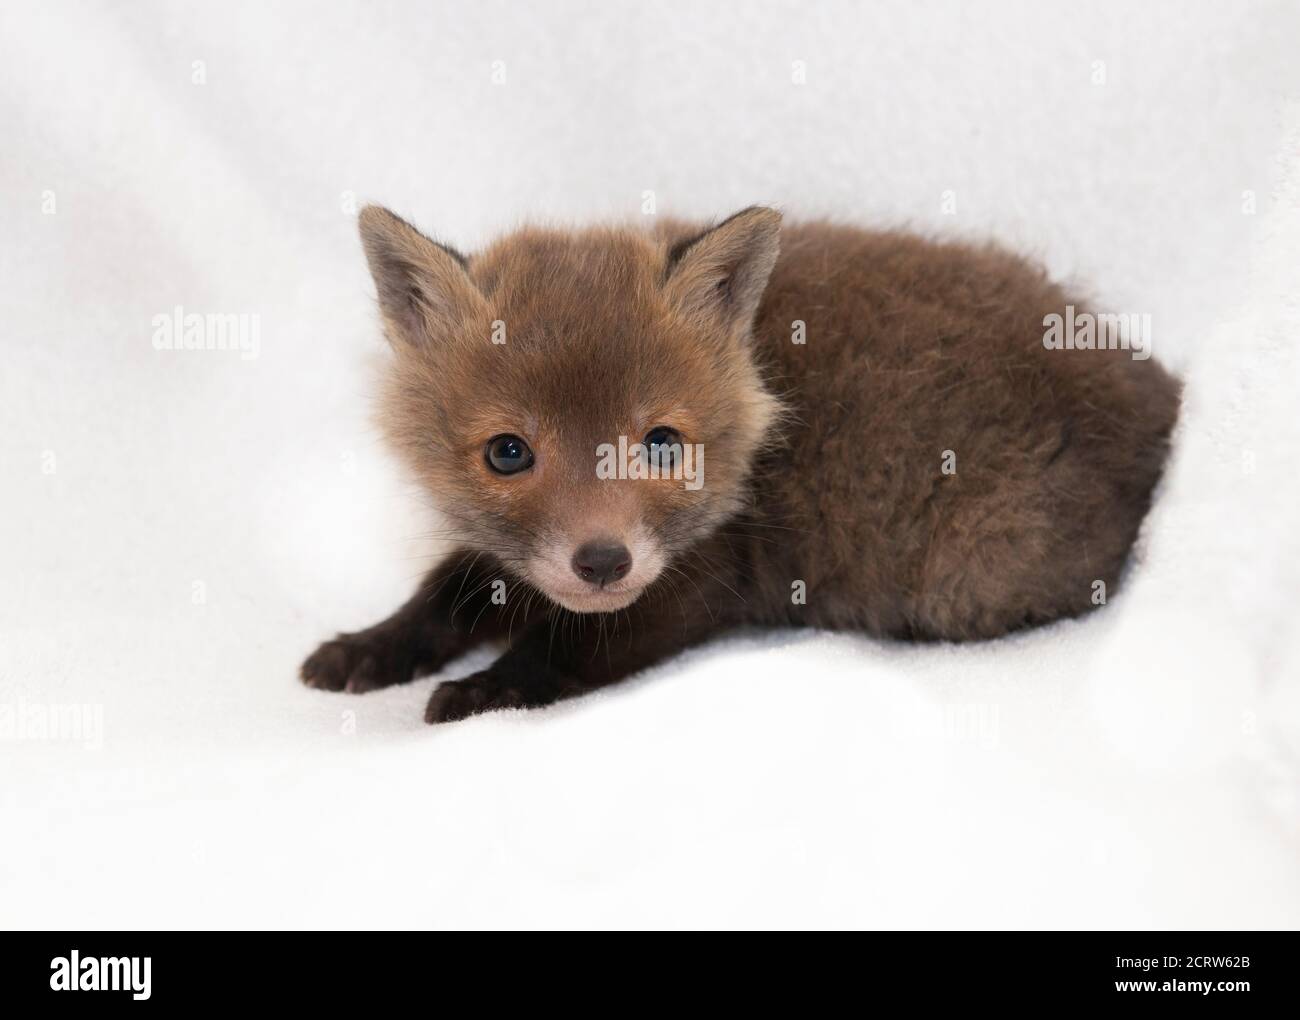 Fox cub, month old baby, lying on a white blanket Stock Photo